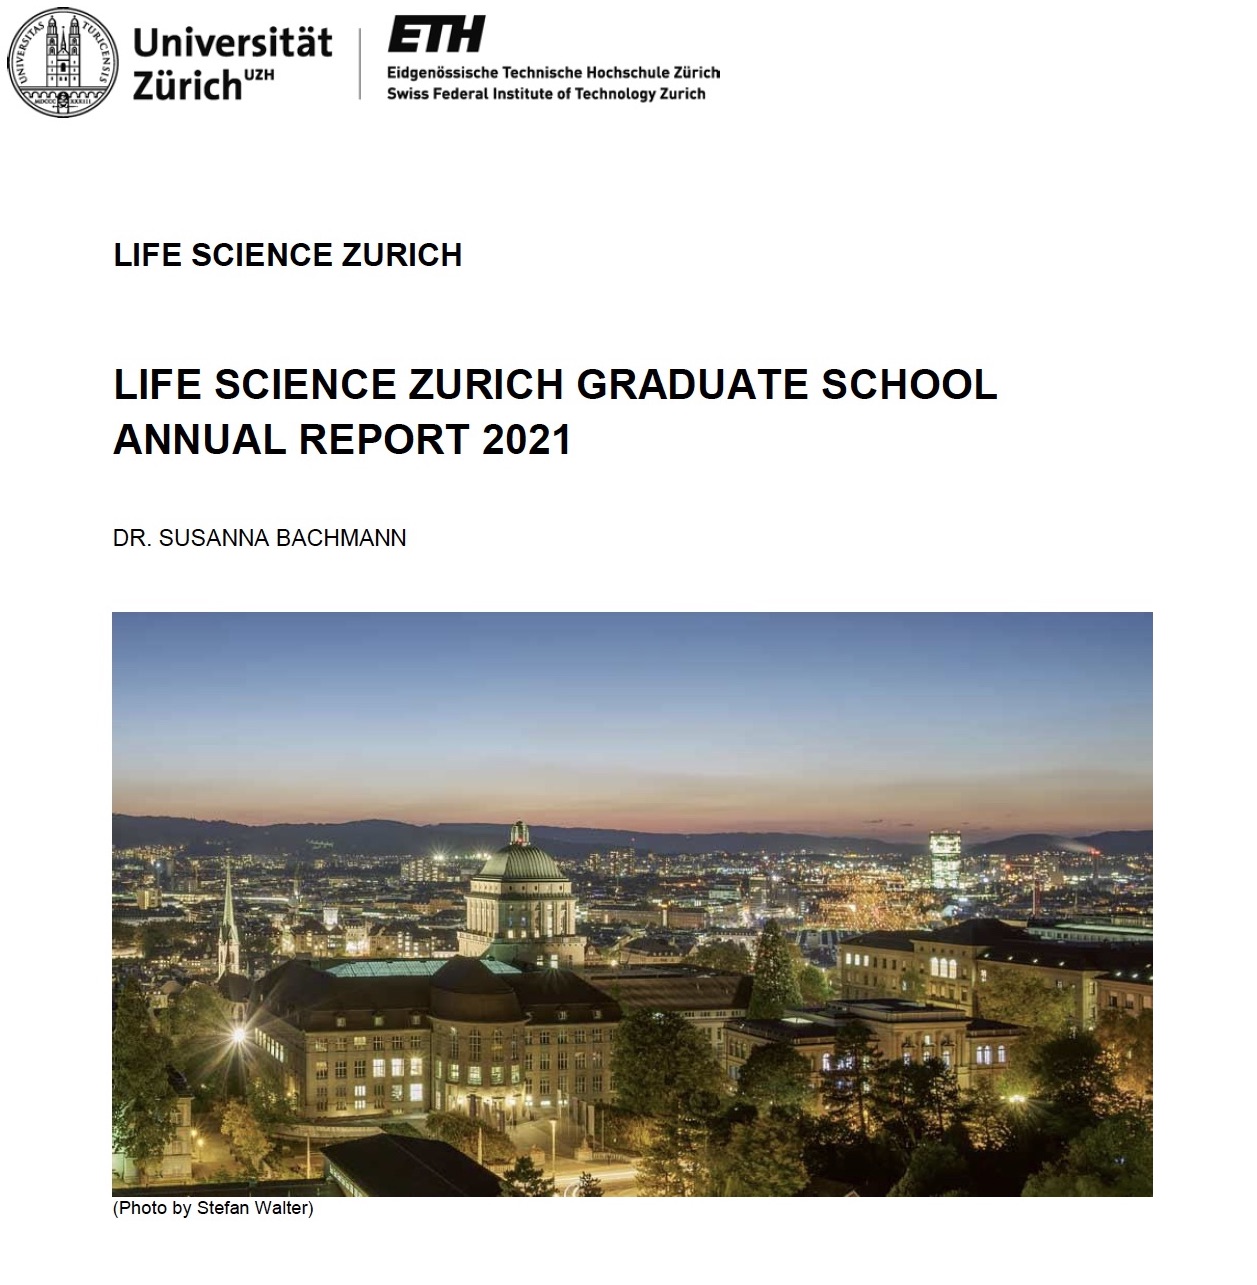 Annual Report 2021 front page